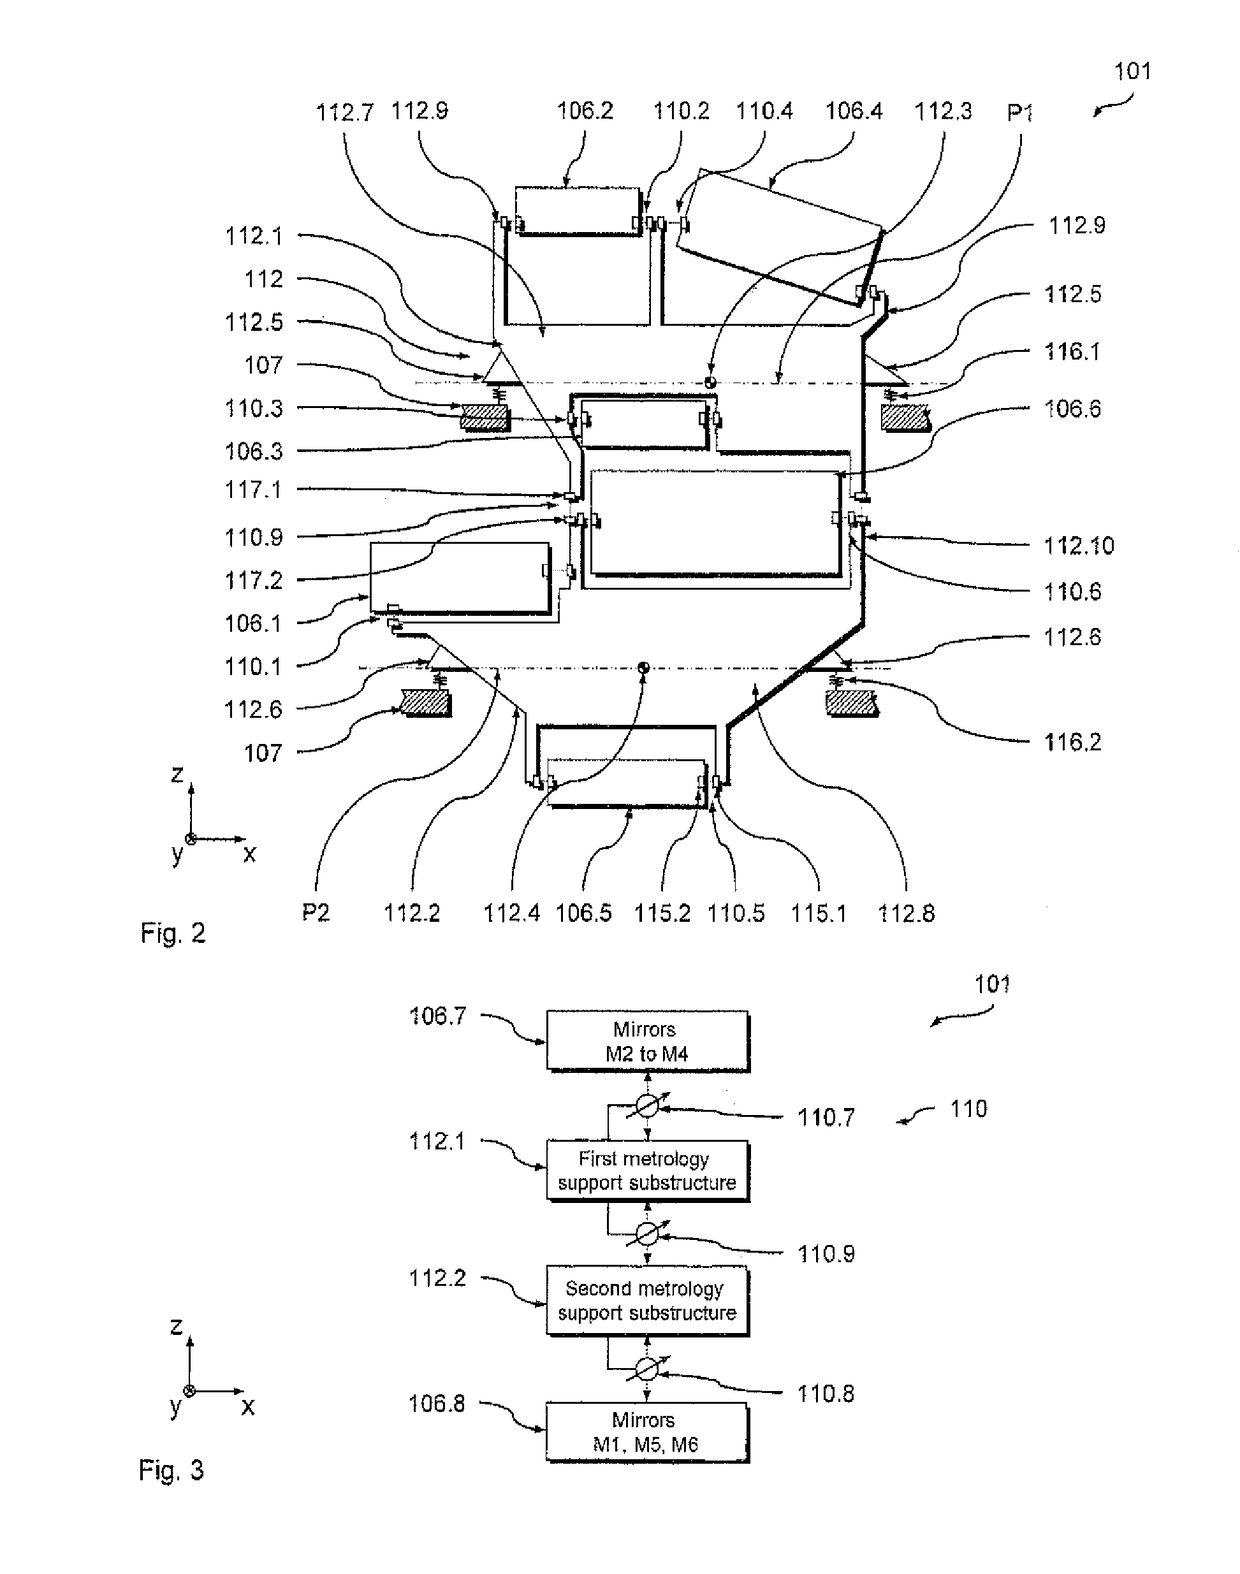 Optical imaging arrangement with multiple metrology support units